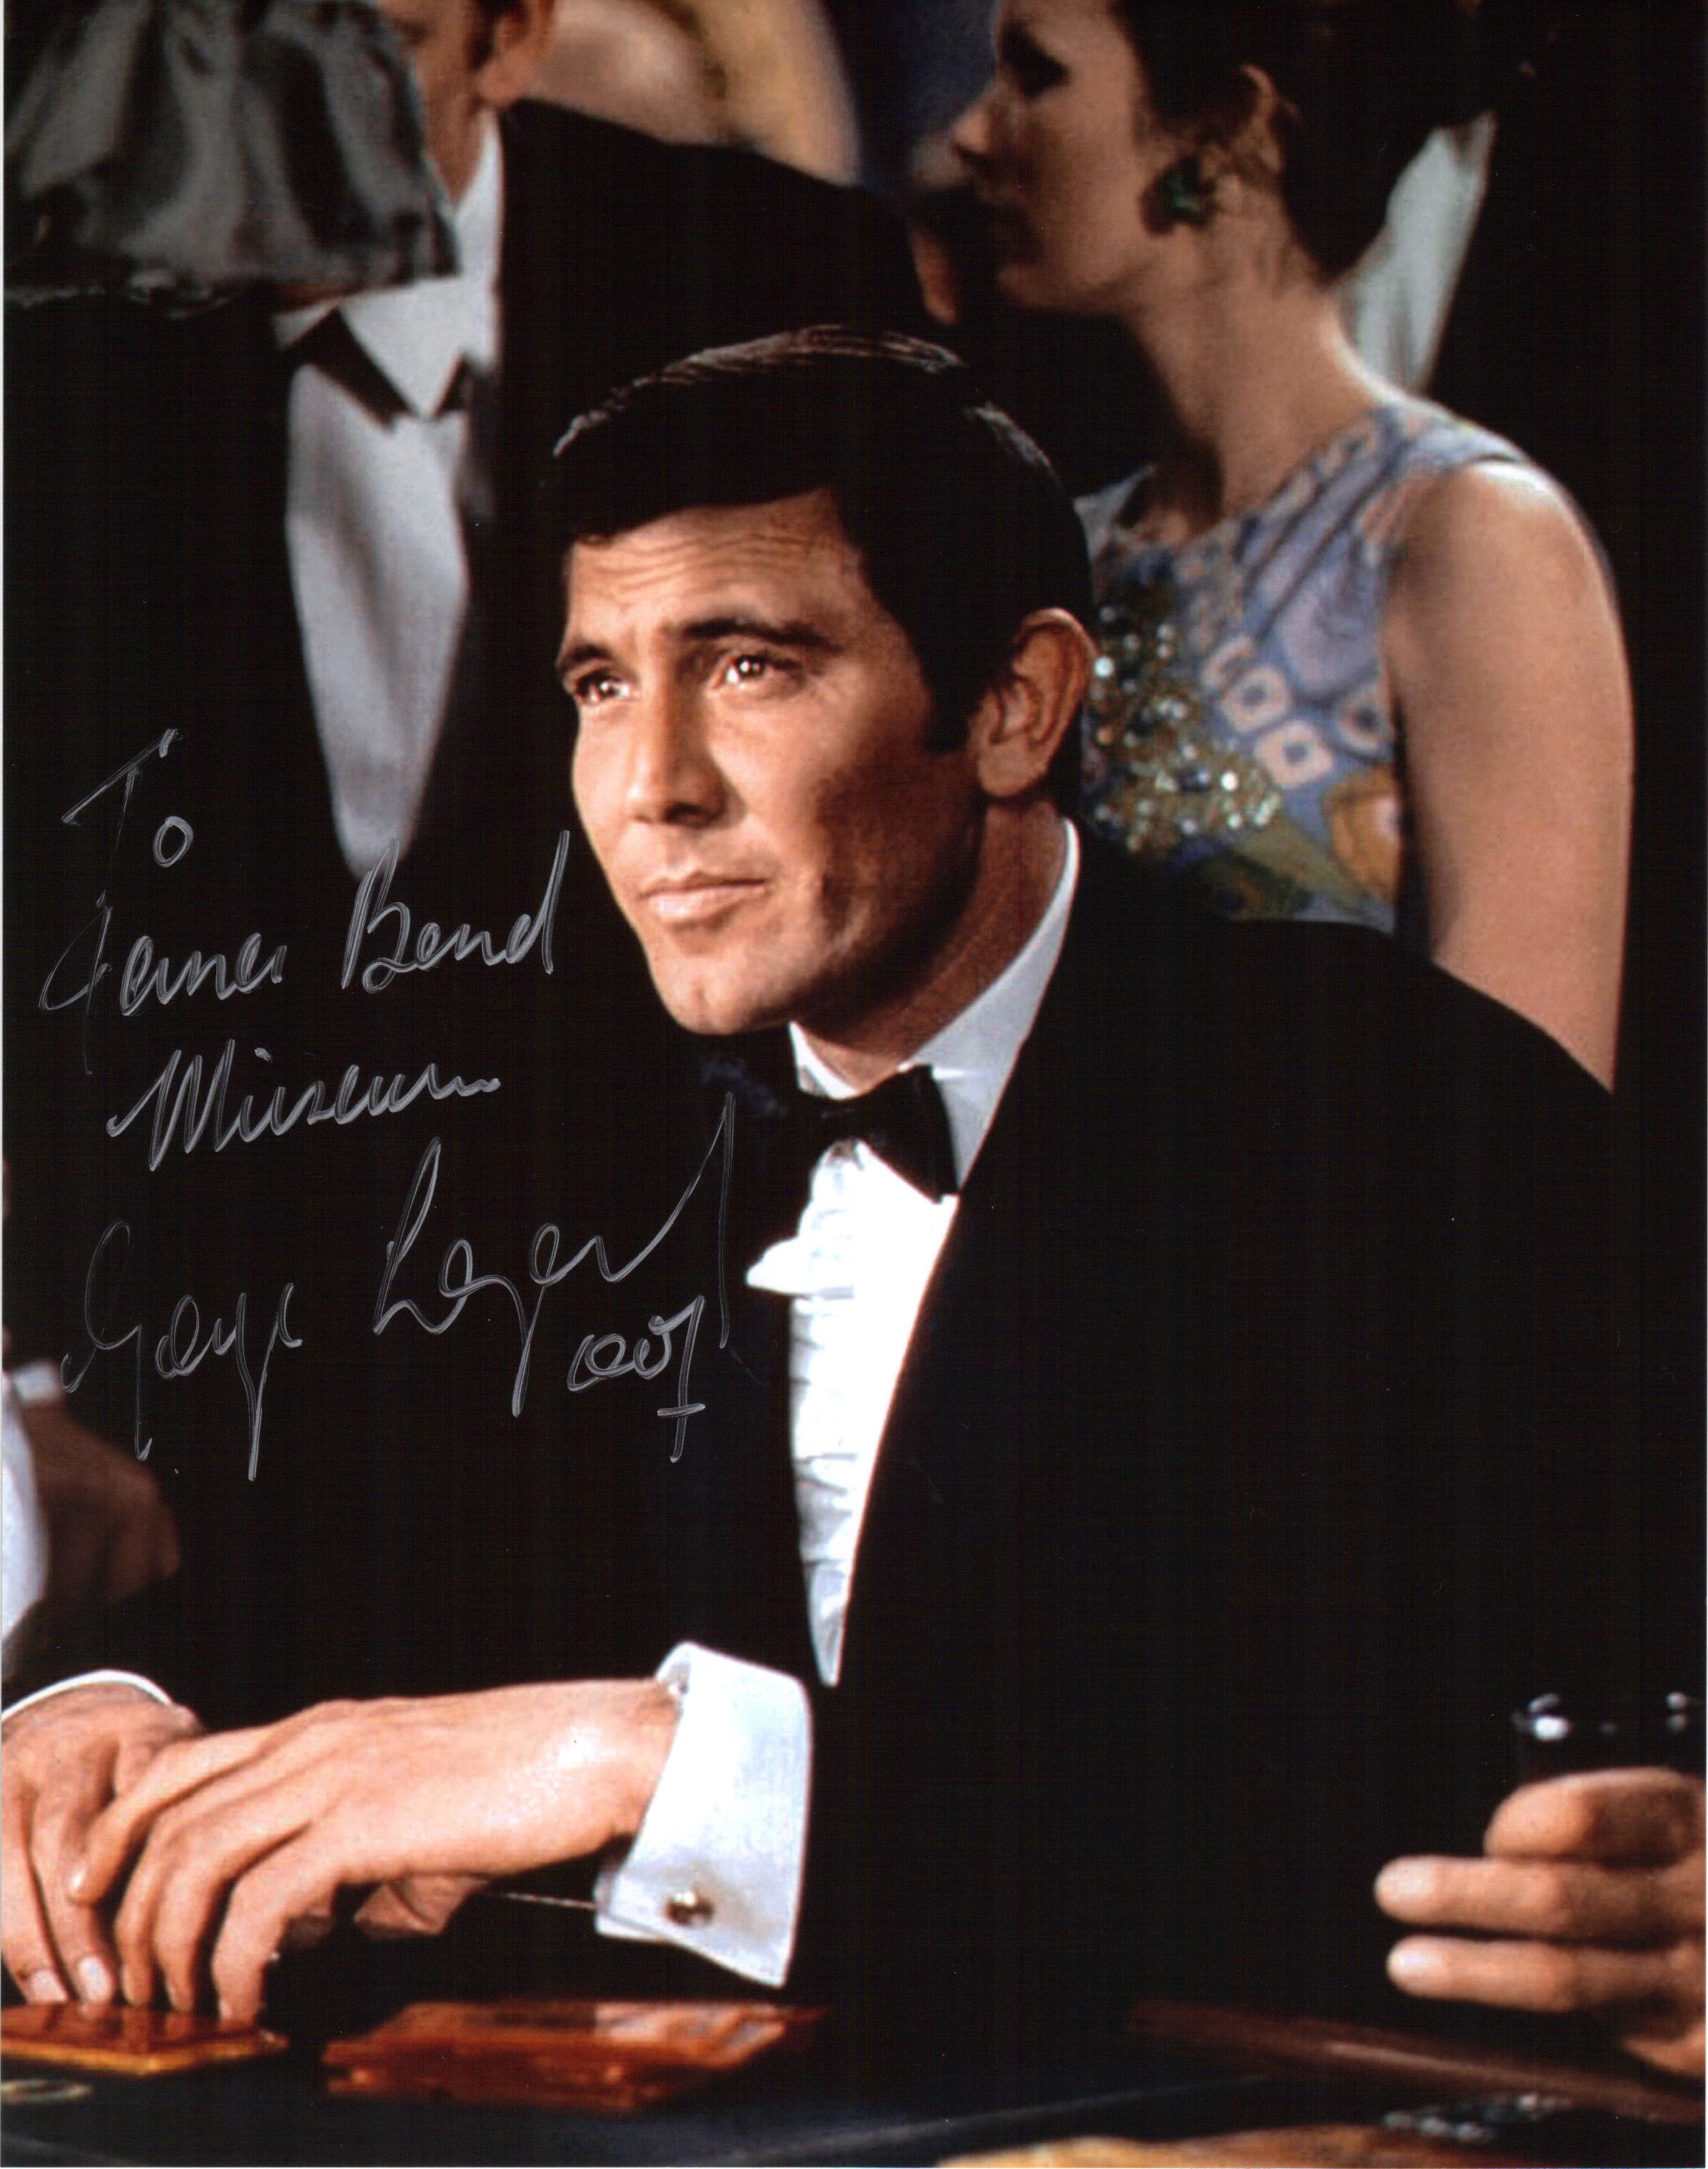 George Lazenby, The One Time James Bond